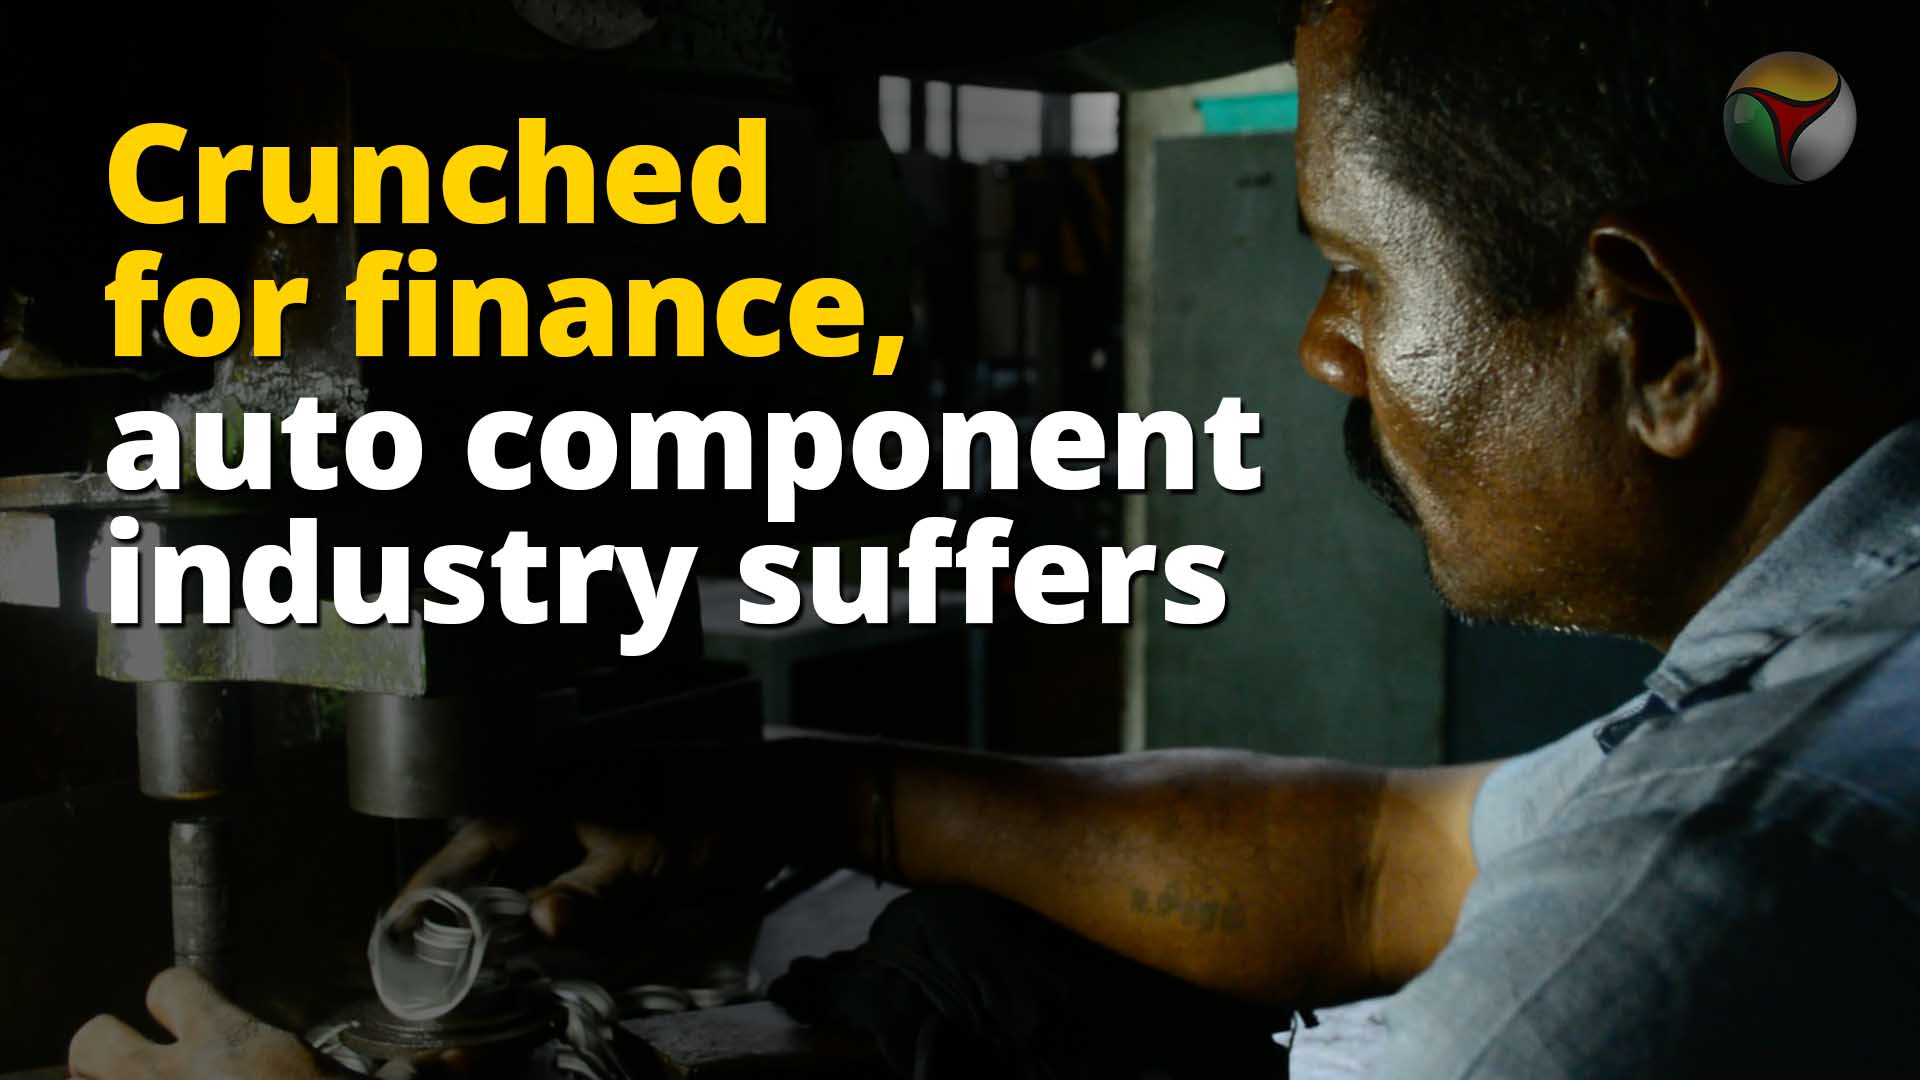 Crunched for finance, auto component industry suffers